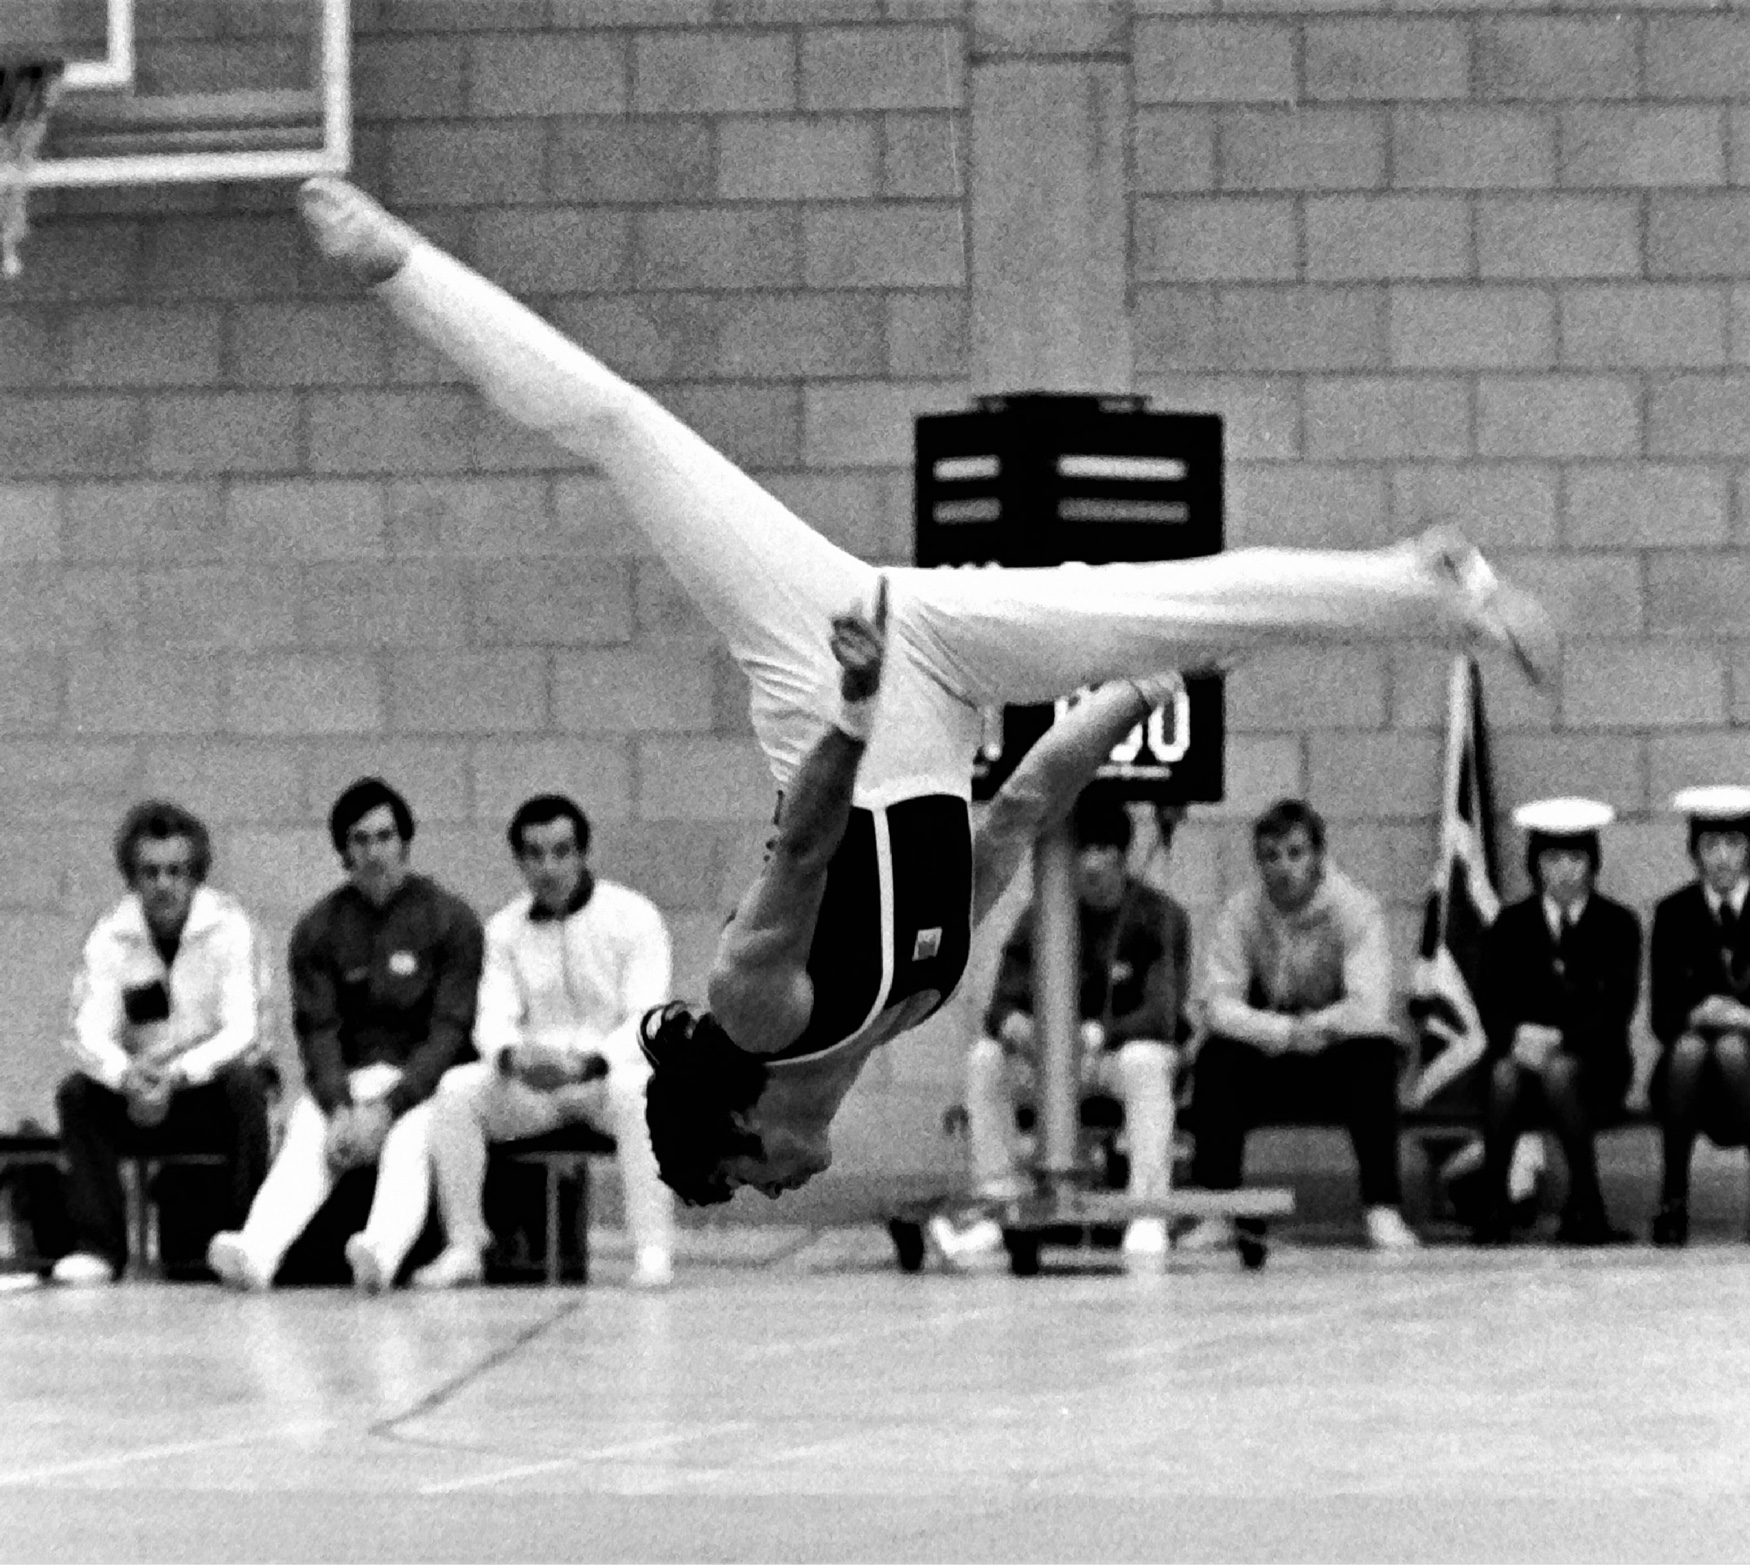 Mike was one of the first, if not the first, to perform this new skill, the free walkover. GB V Holland 1974 - Photo Alan Burrows